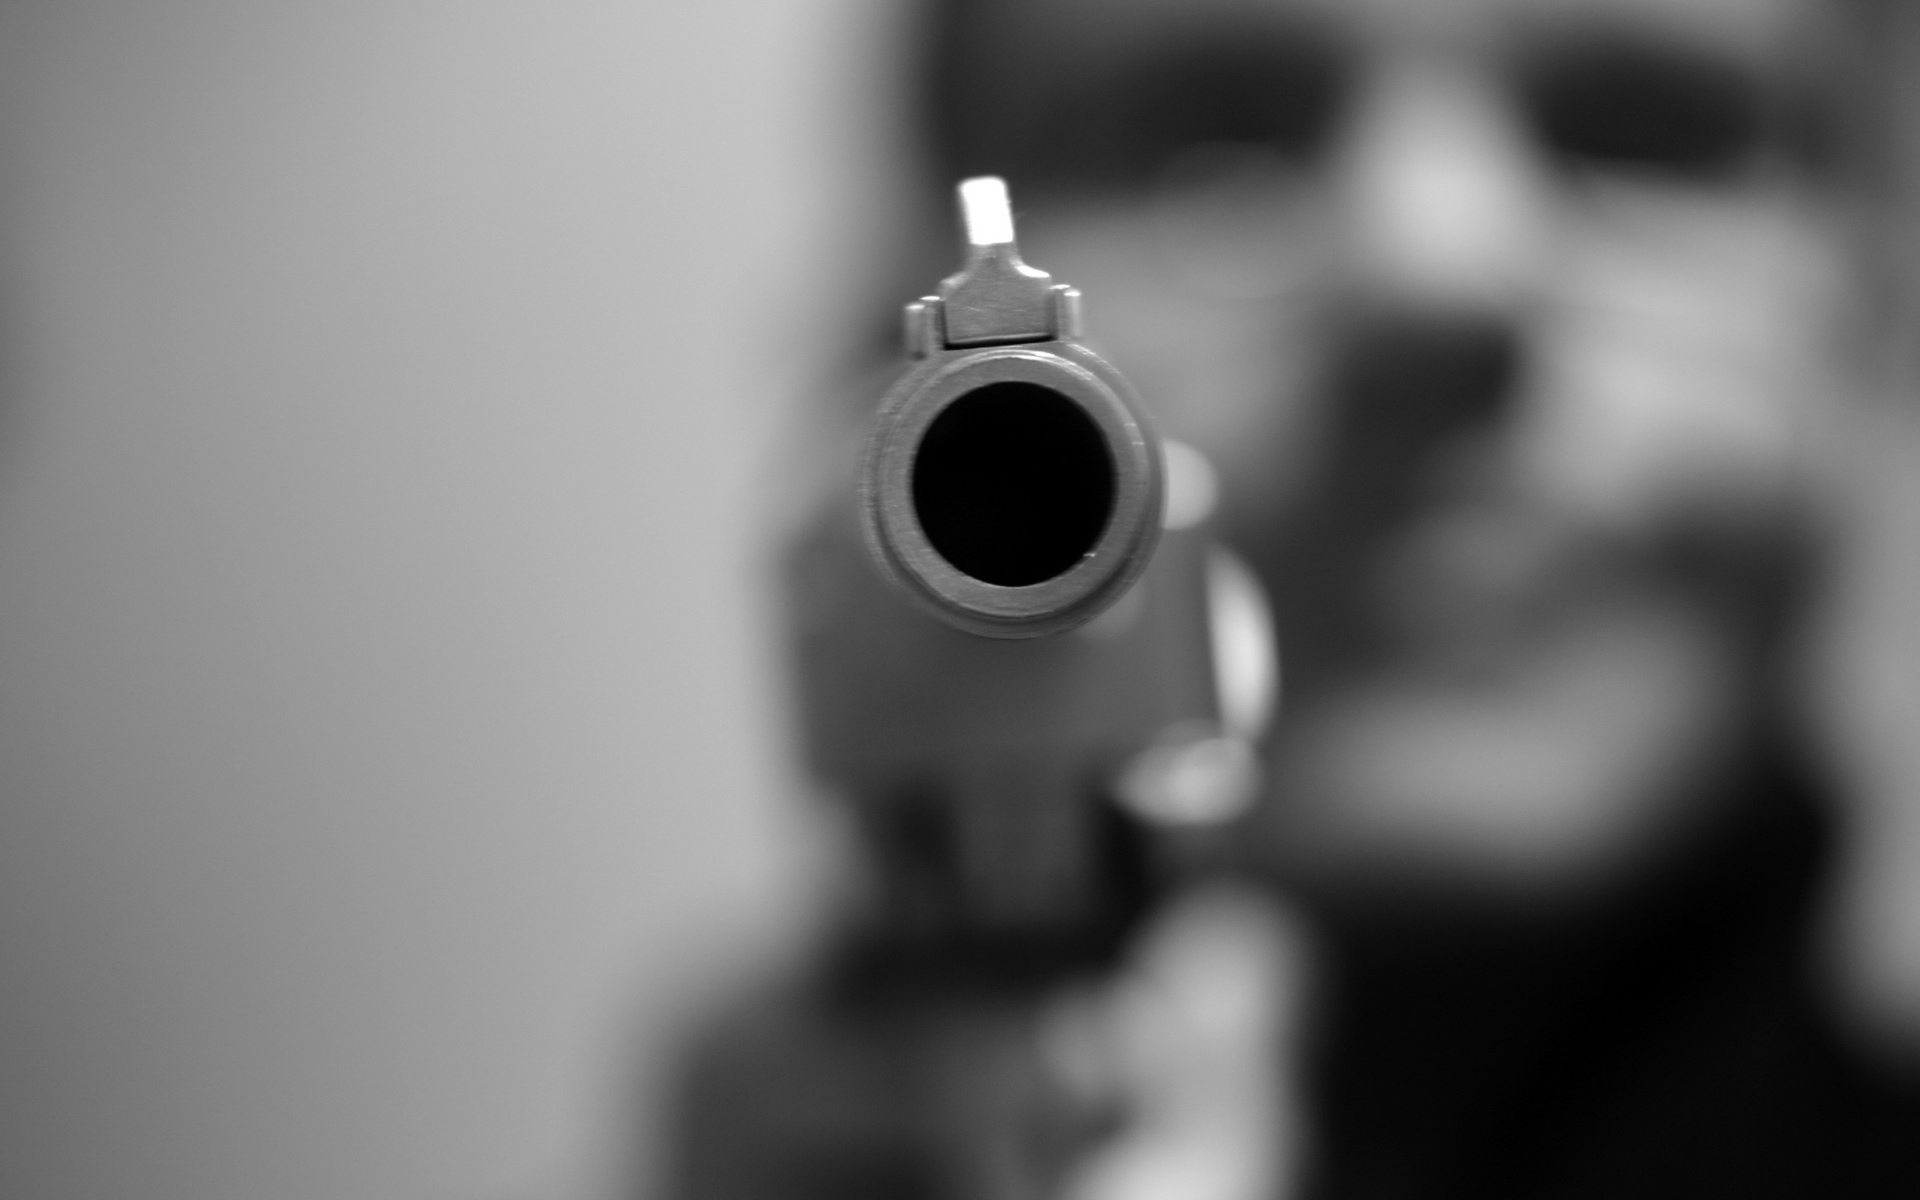 weapons, Guns, Pistol, Black, White, Photography, Barrel, Hole, Circle, Shape, Metal, Steel, Men, Male, Boy, People, Pov, Face, Eyes, Mood, Situation, Emotion, Angry, Violence Wallpaper